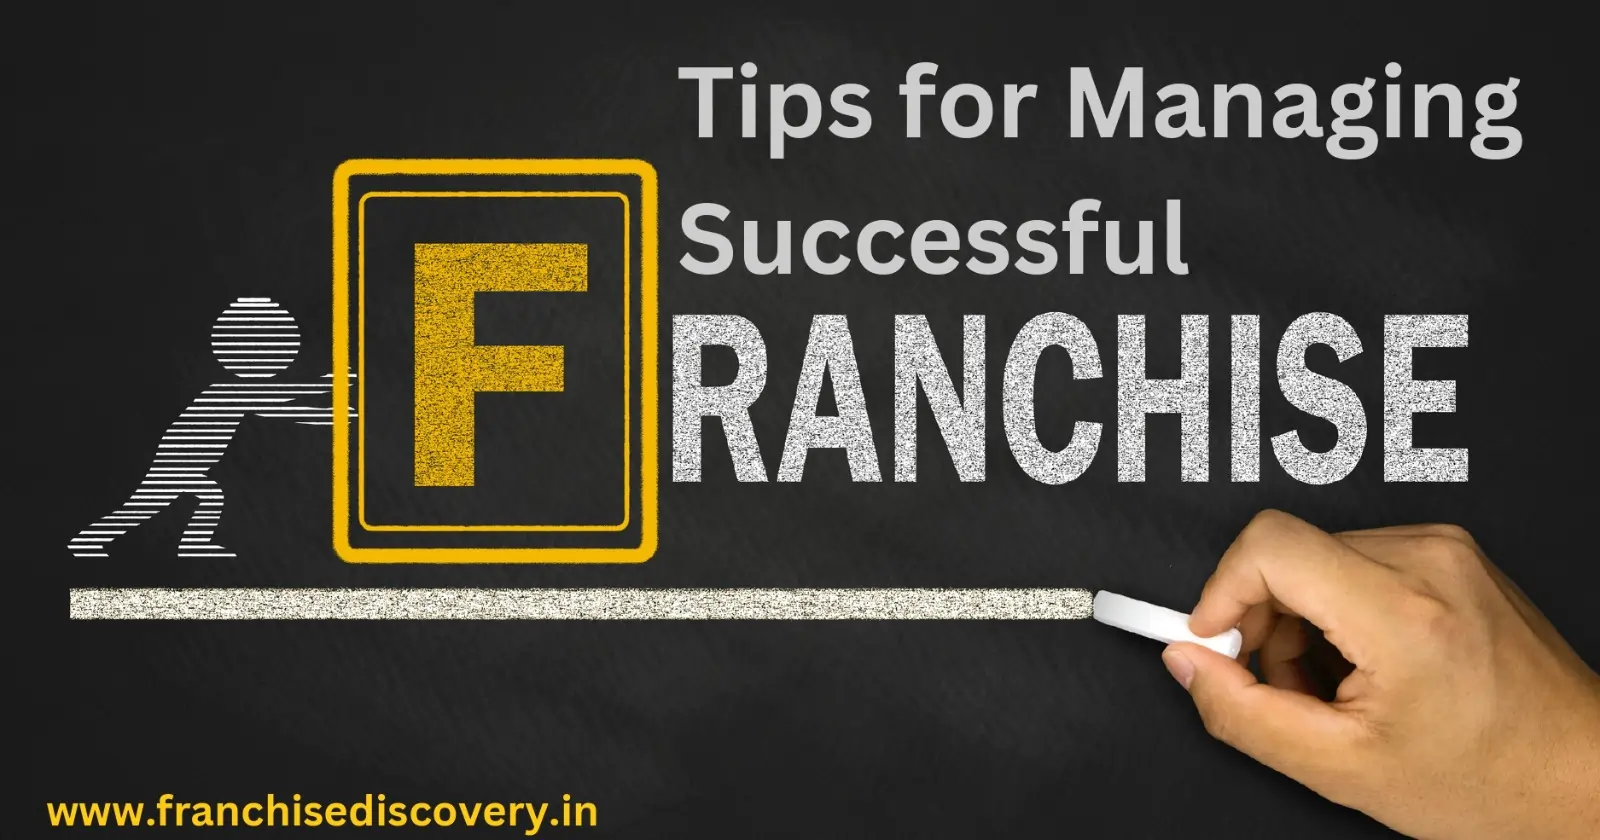 TIPS FOR MANAGING A SUCCESSFUL FRANCHISE BUSINESS